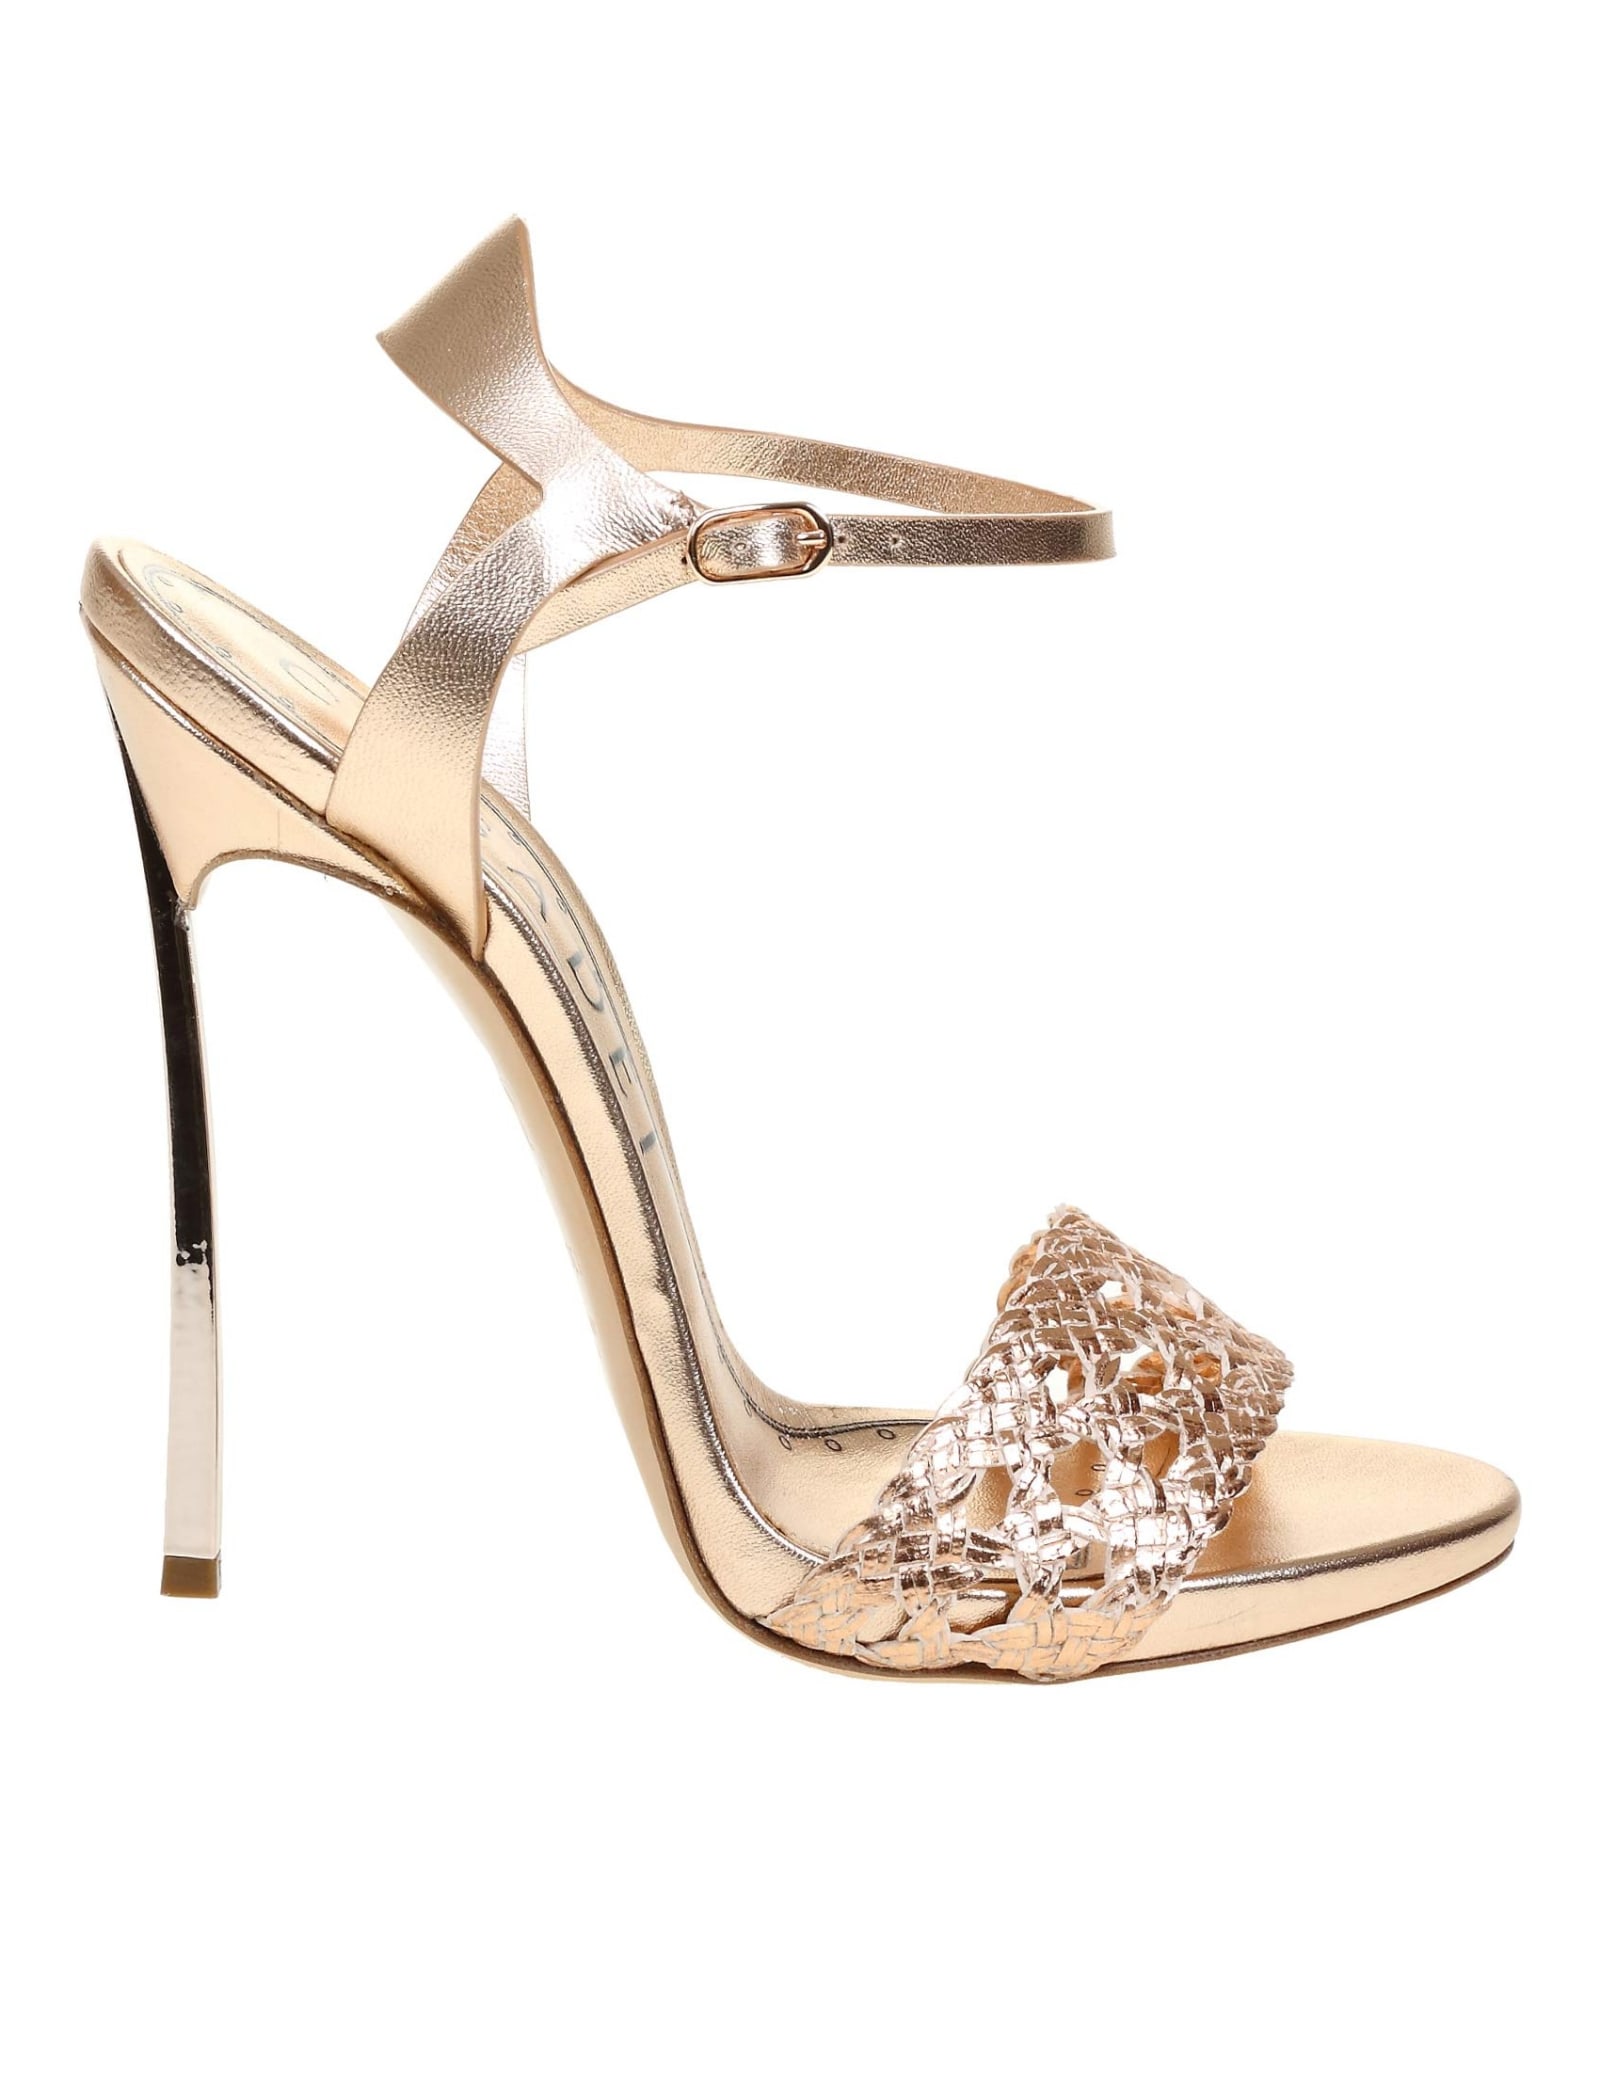 Casadei Versilia Sandal With Woven Vegan Leather And Gold Laminated Leather